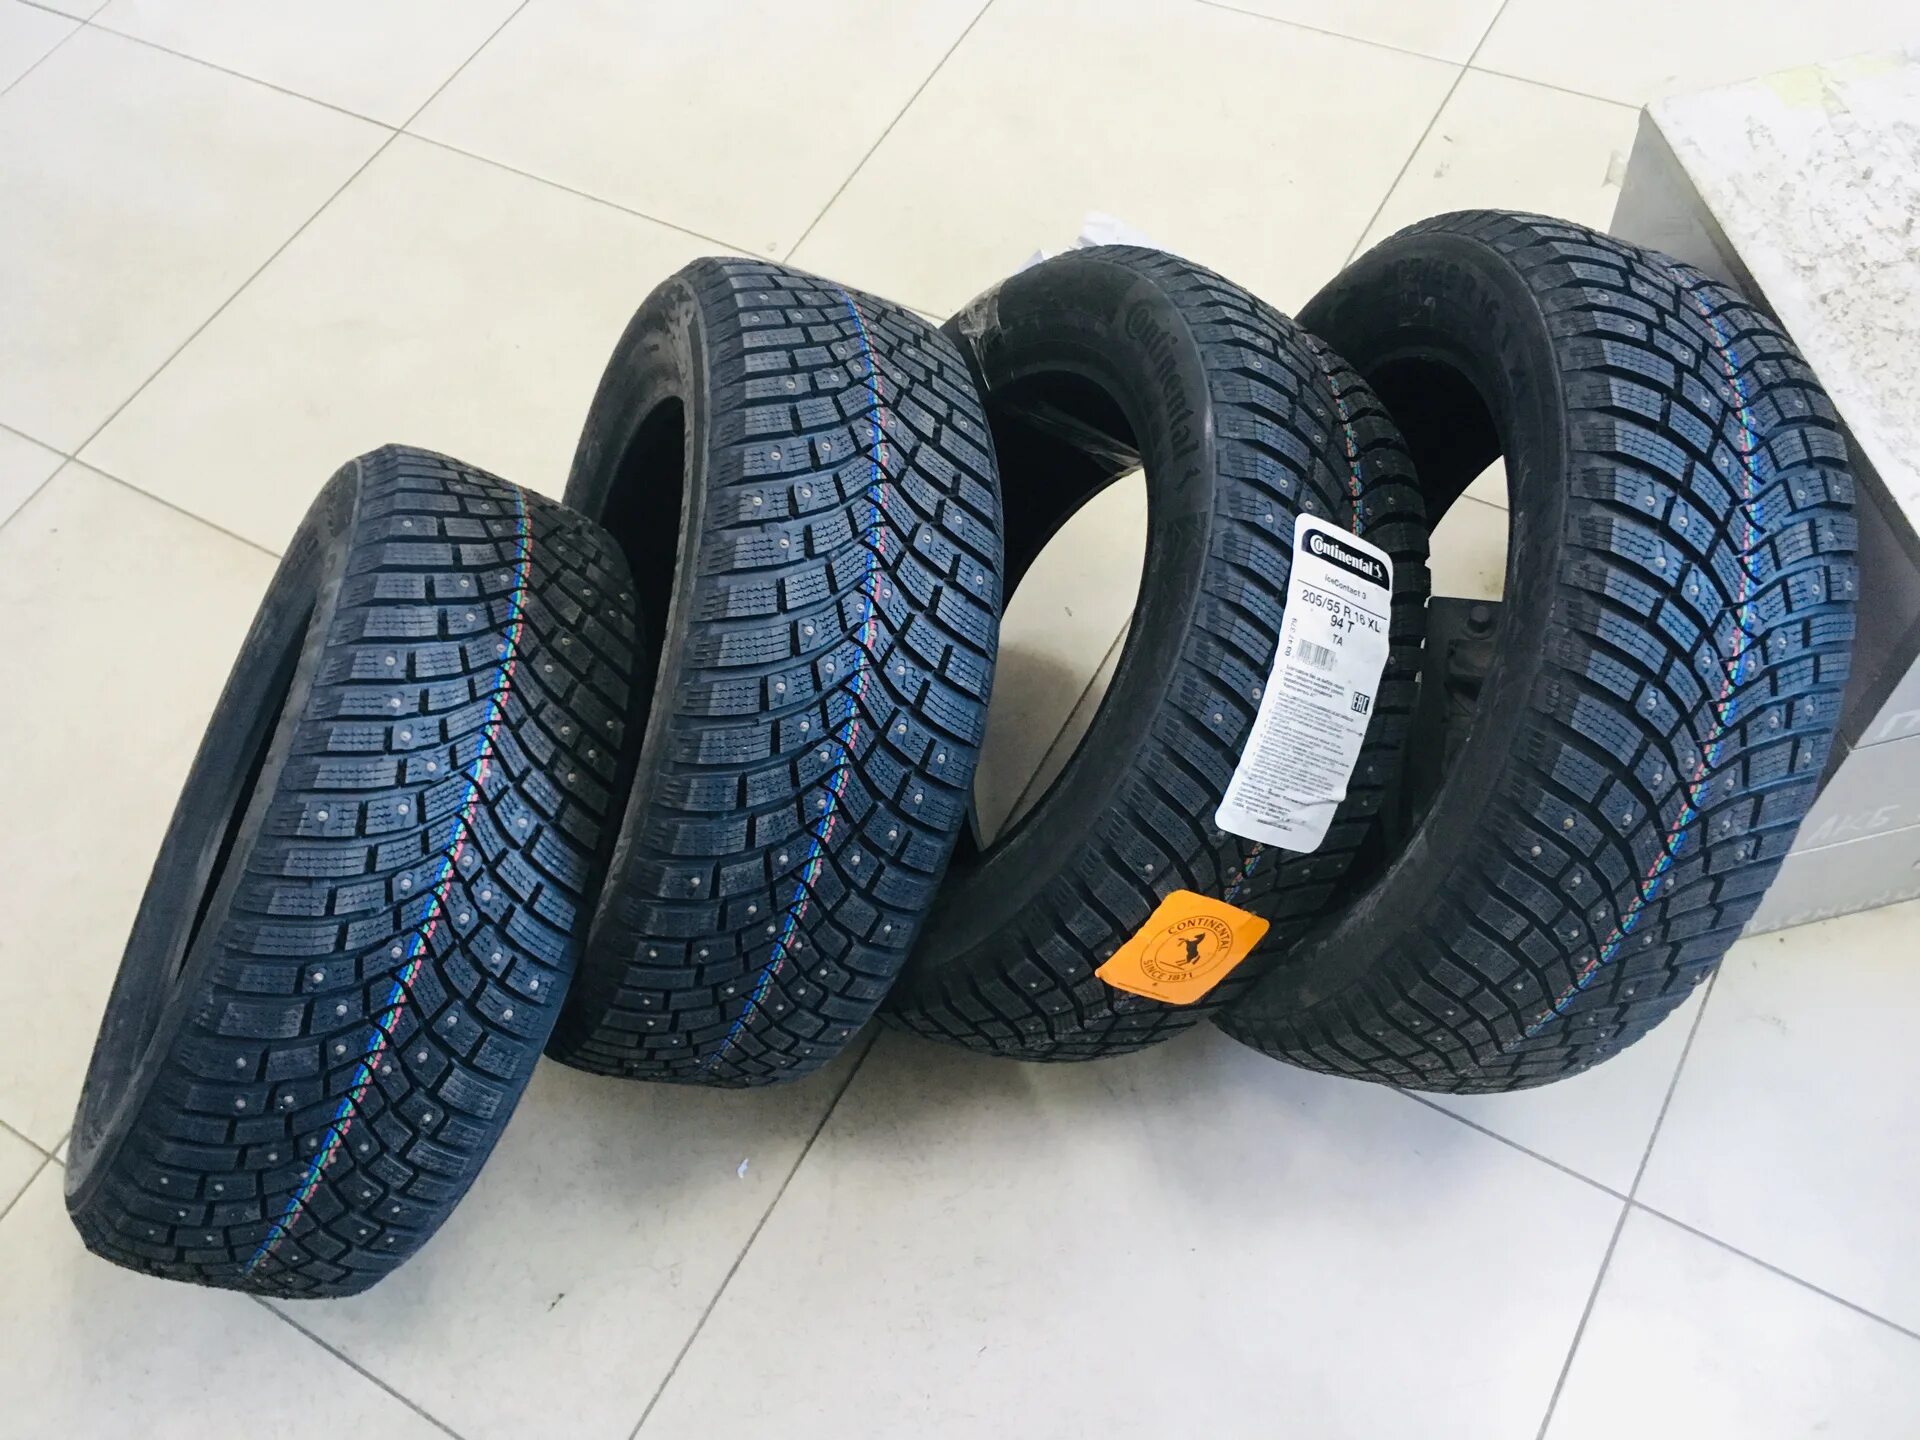 Continental CONTIICECONTACT 3. 235/55r19 105t Continental ICECONTACT 3. Continental ICECONTACT 3 ta r16 205/55 94t шип XL. Континенталь 215/60/17 t 96 Ice contact 3 ta.